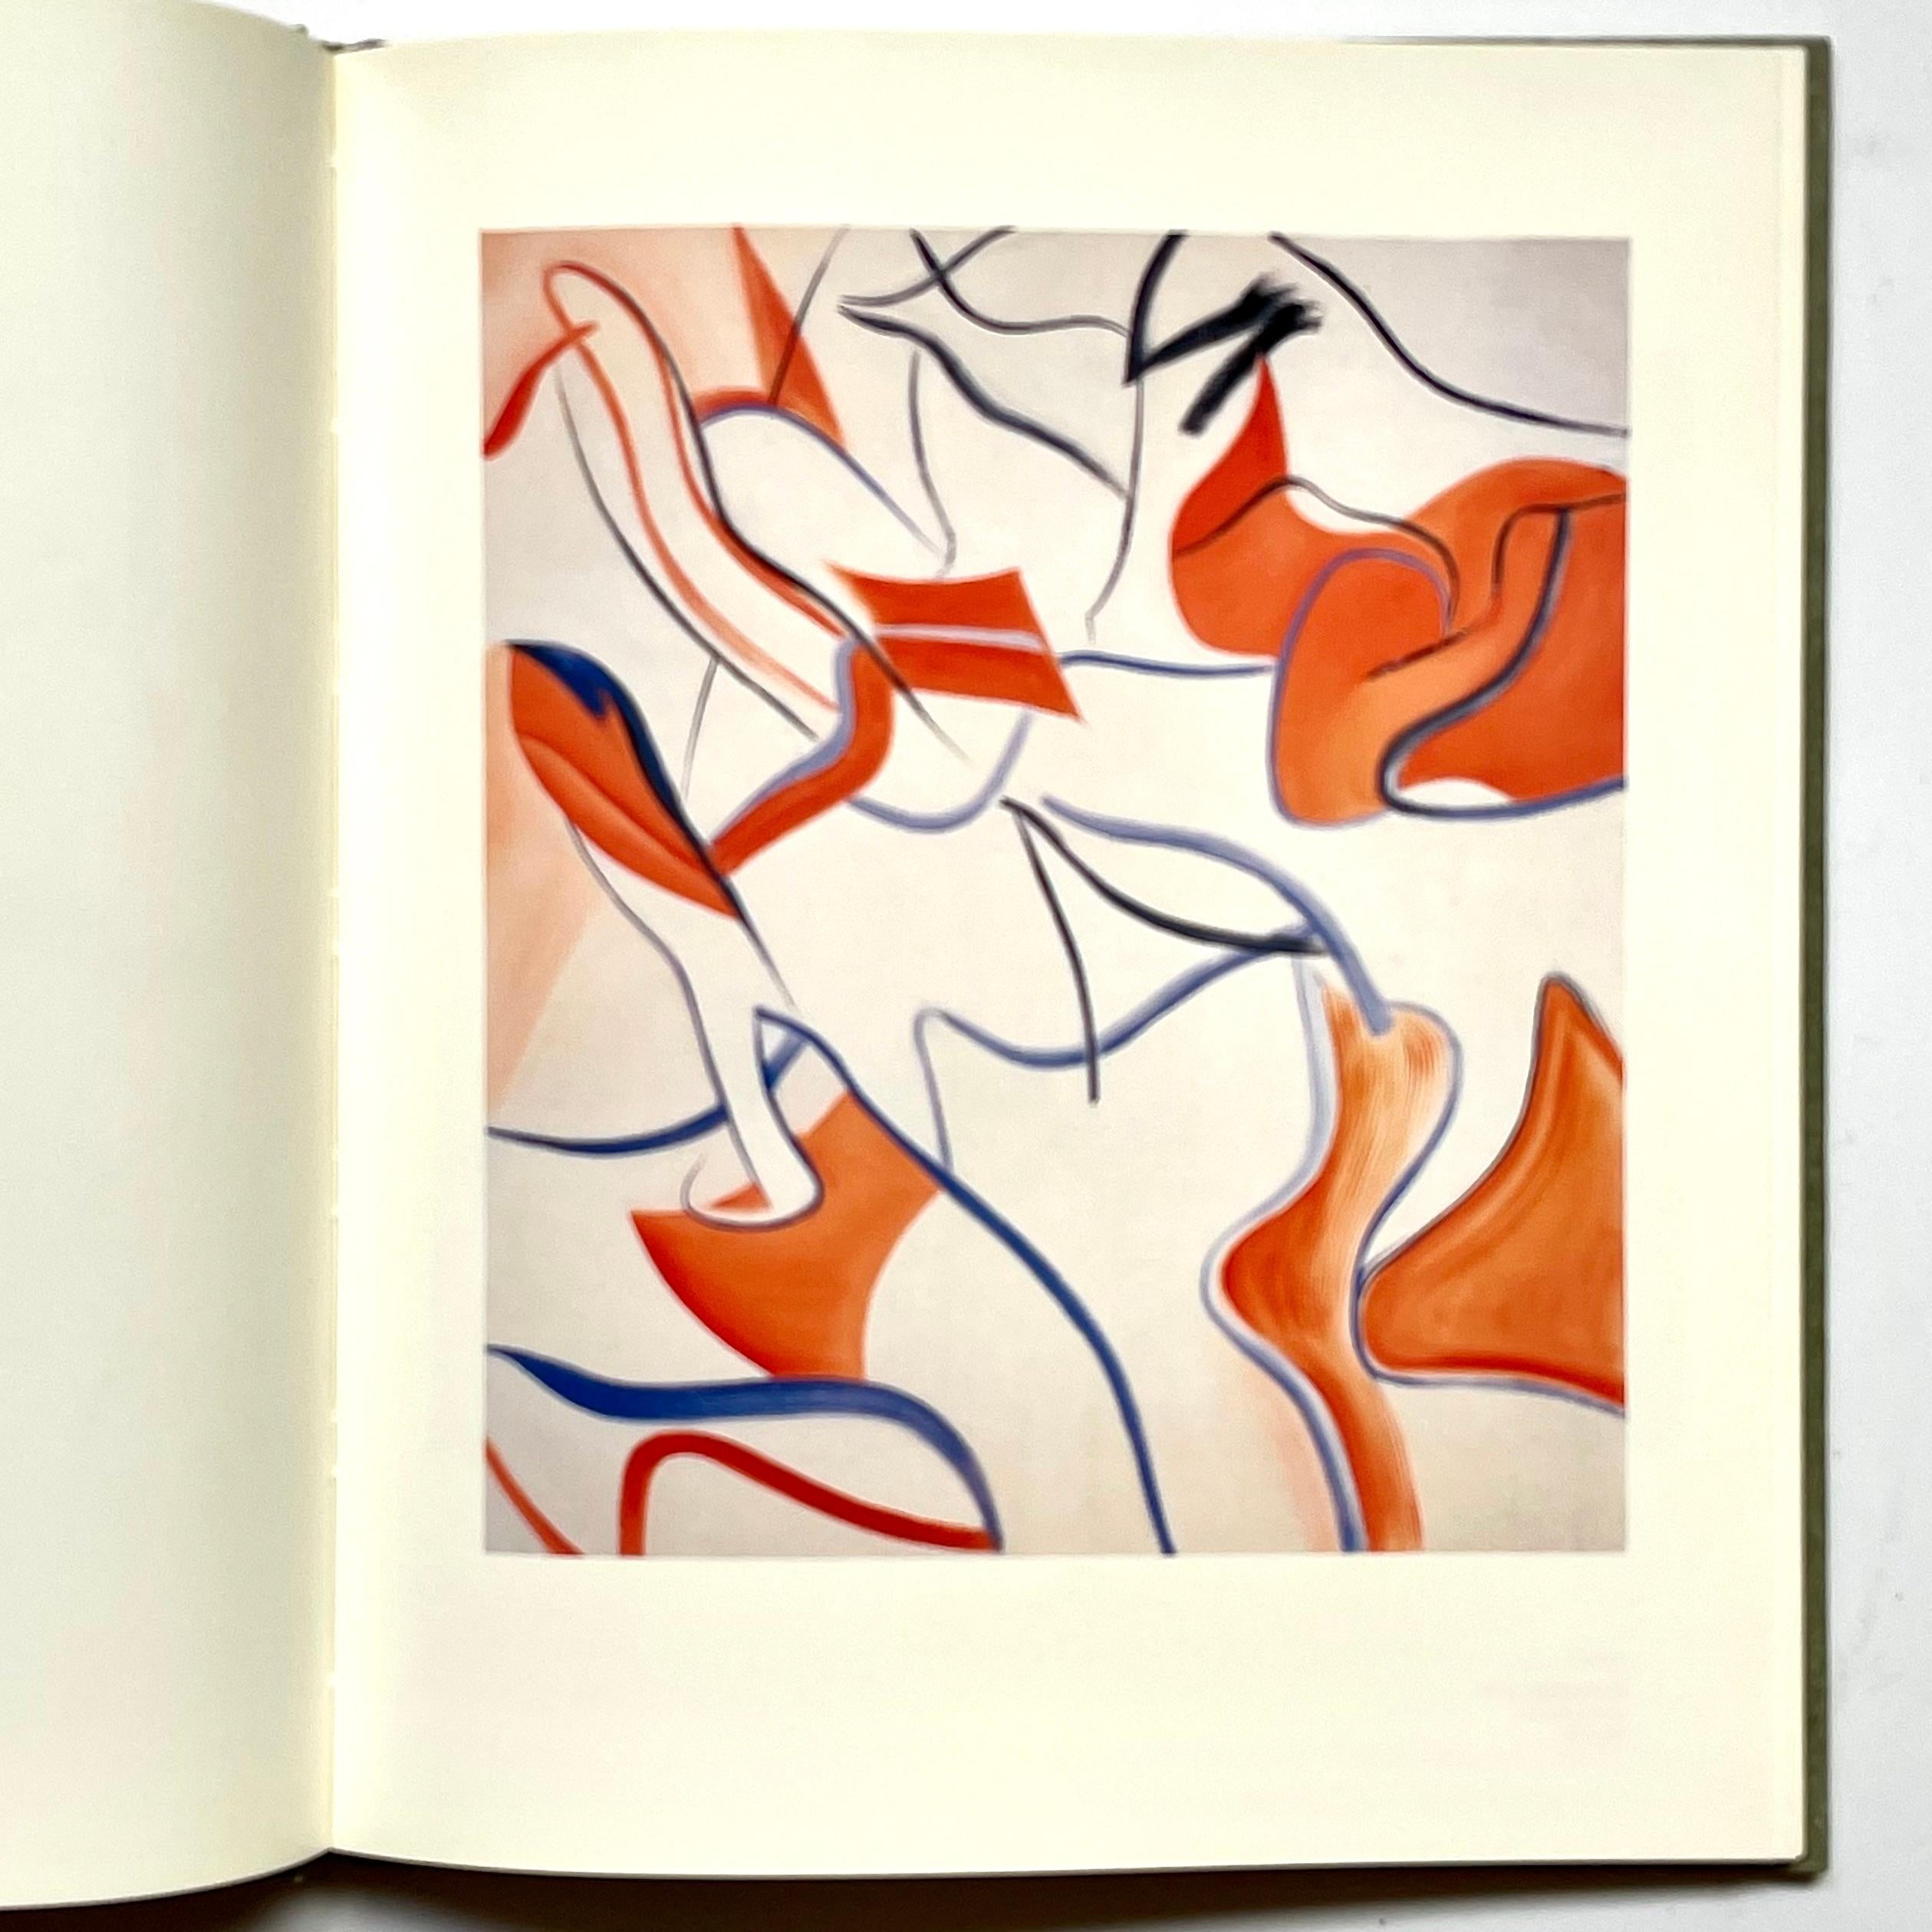 Late 20th Century De Kooning / Dubuffet, the Late Works, Peter Schjeldahl, 1st Edition, Pace, 1993